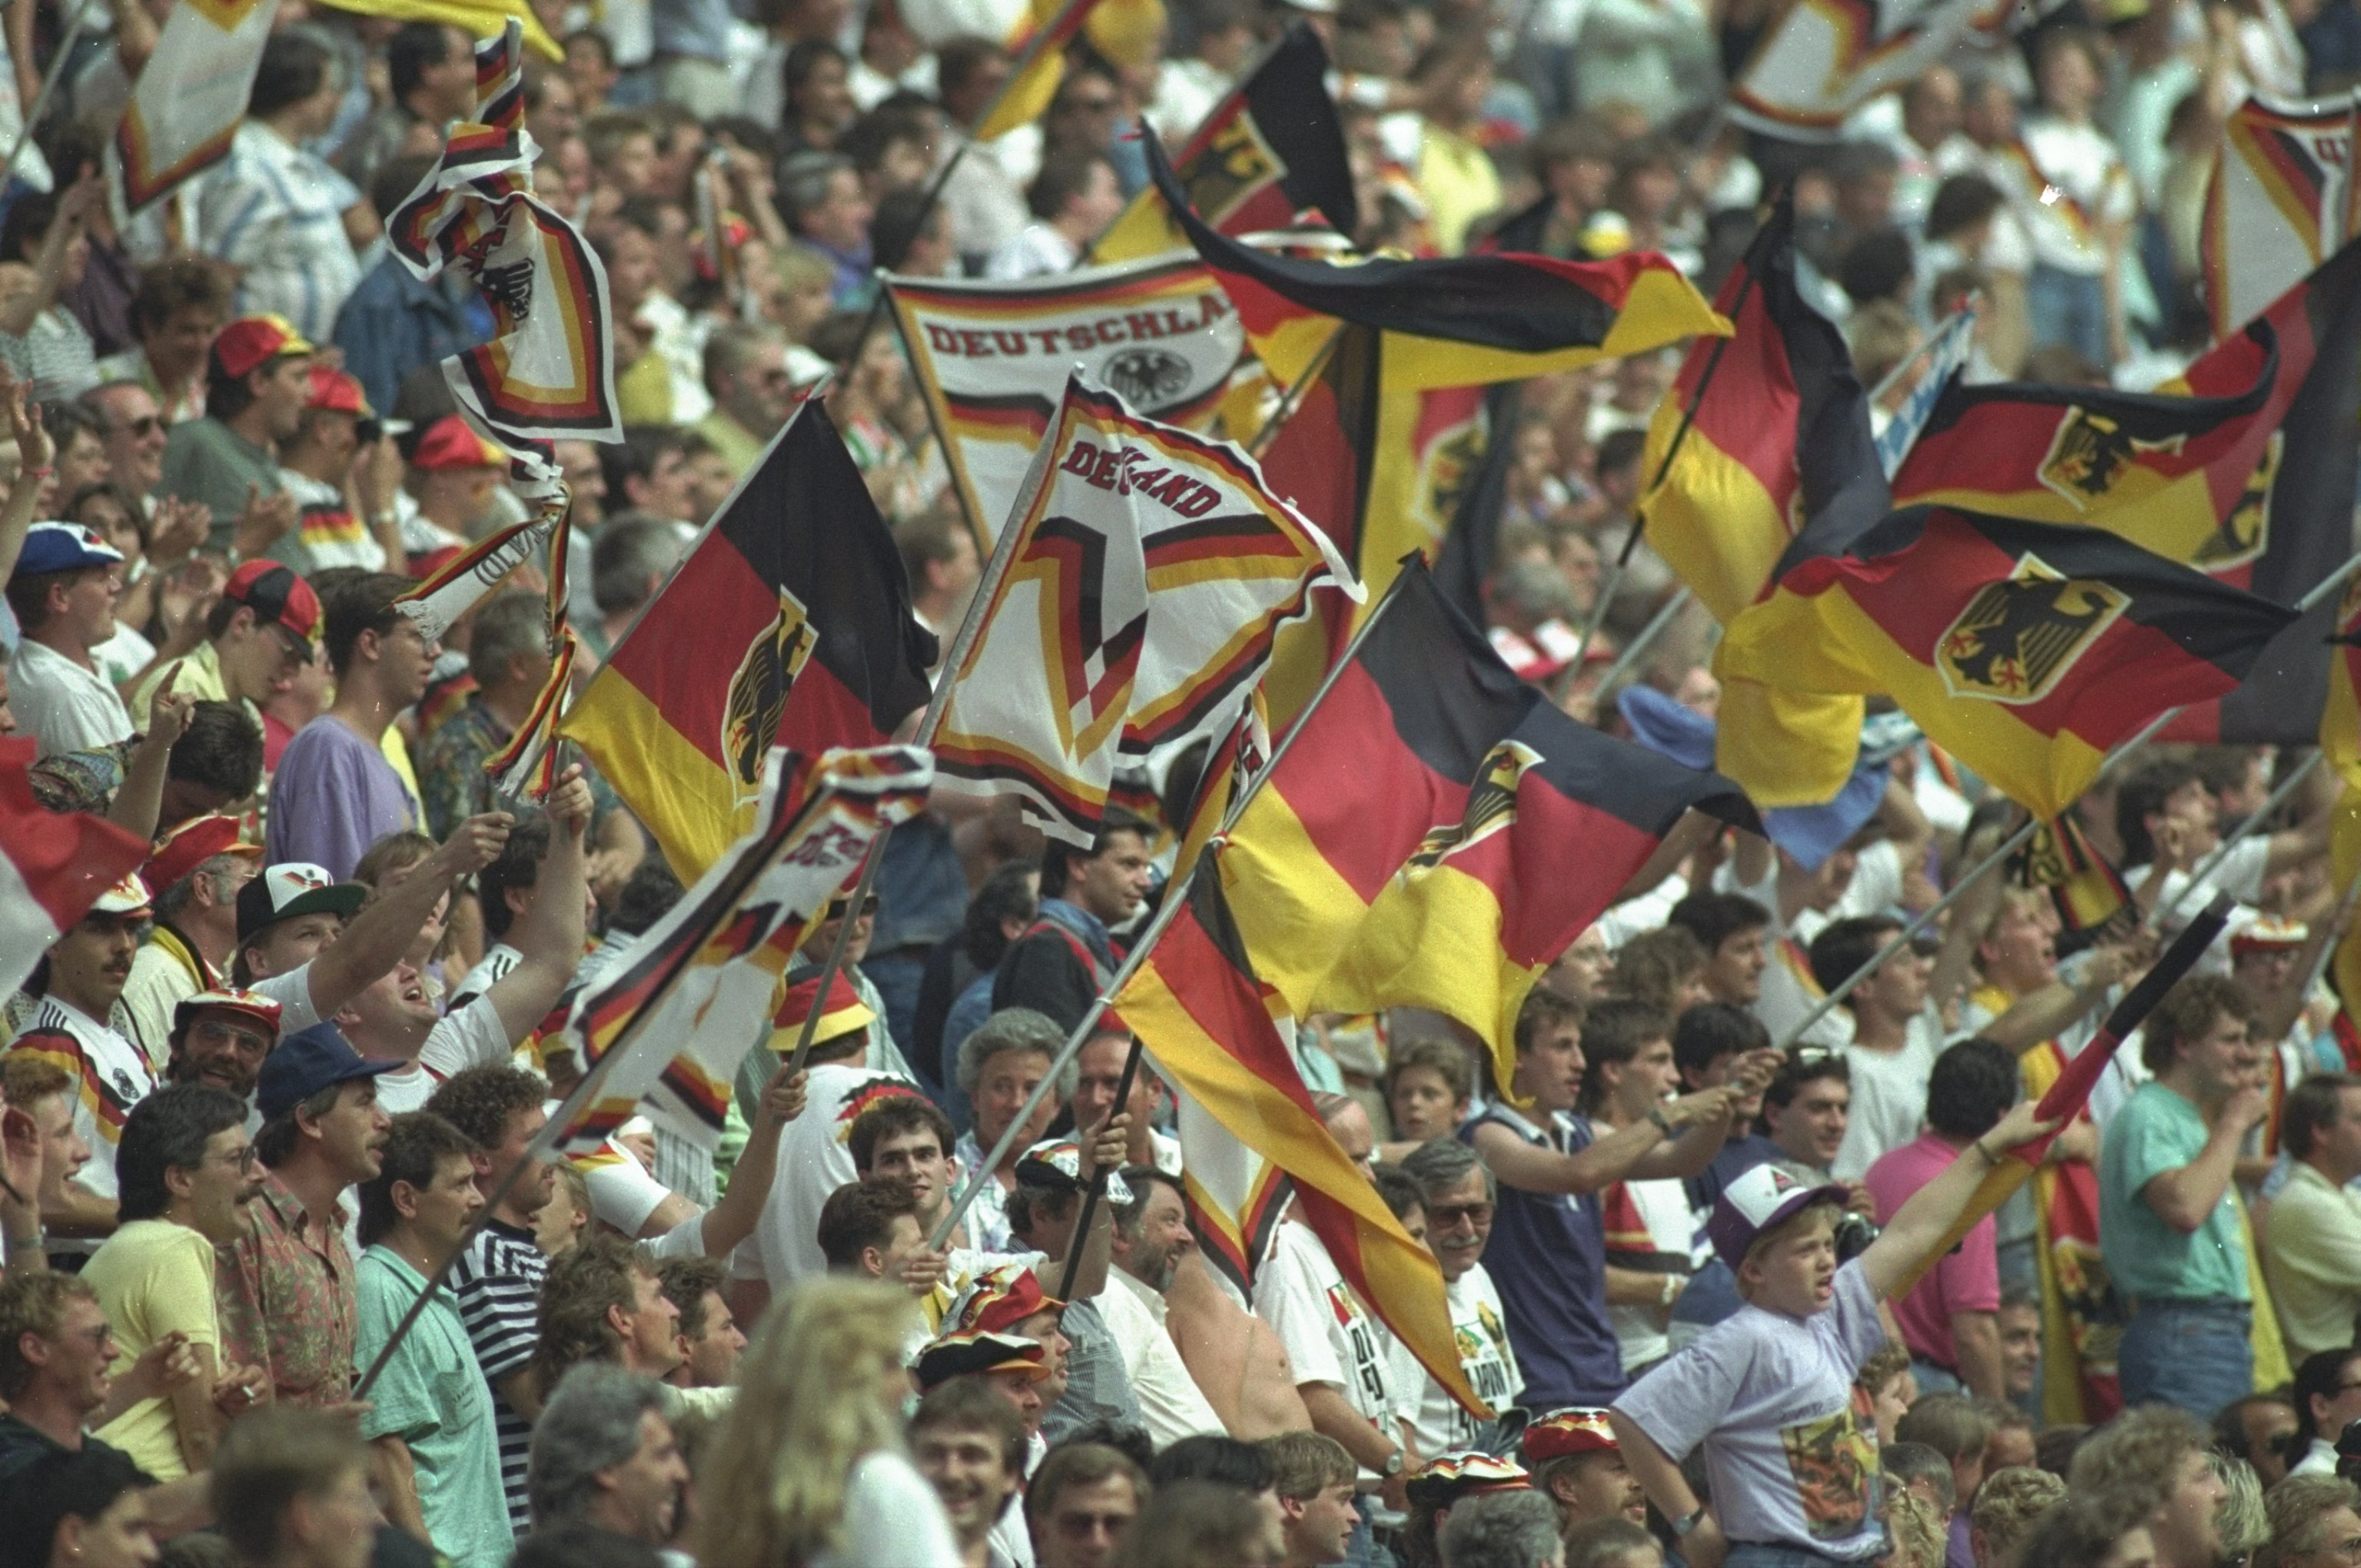 8 Jun 1990:  General view of the West Germany supporters during a World Cup match in Italy. \ Mandatory Credit: Allsport UK /Allsport